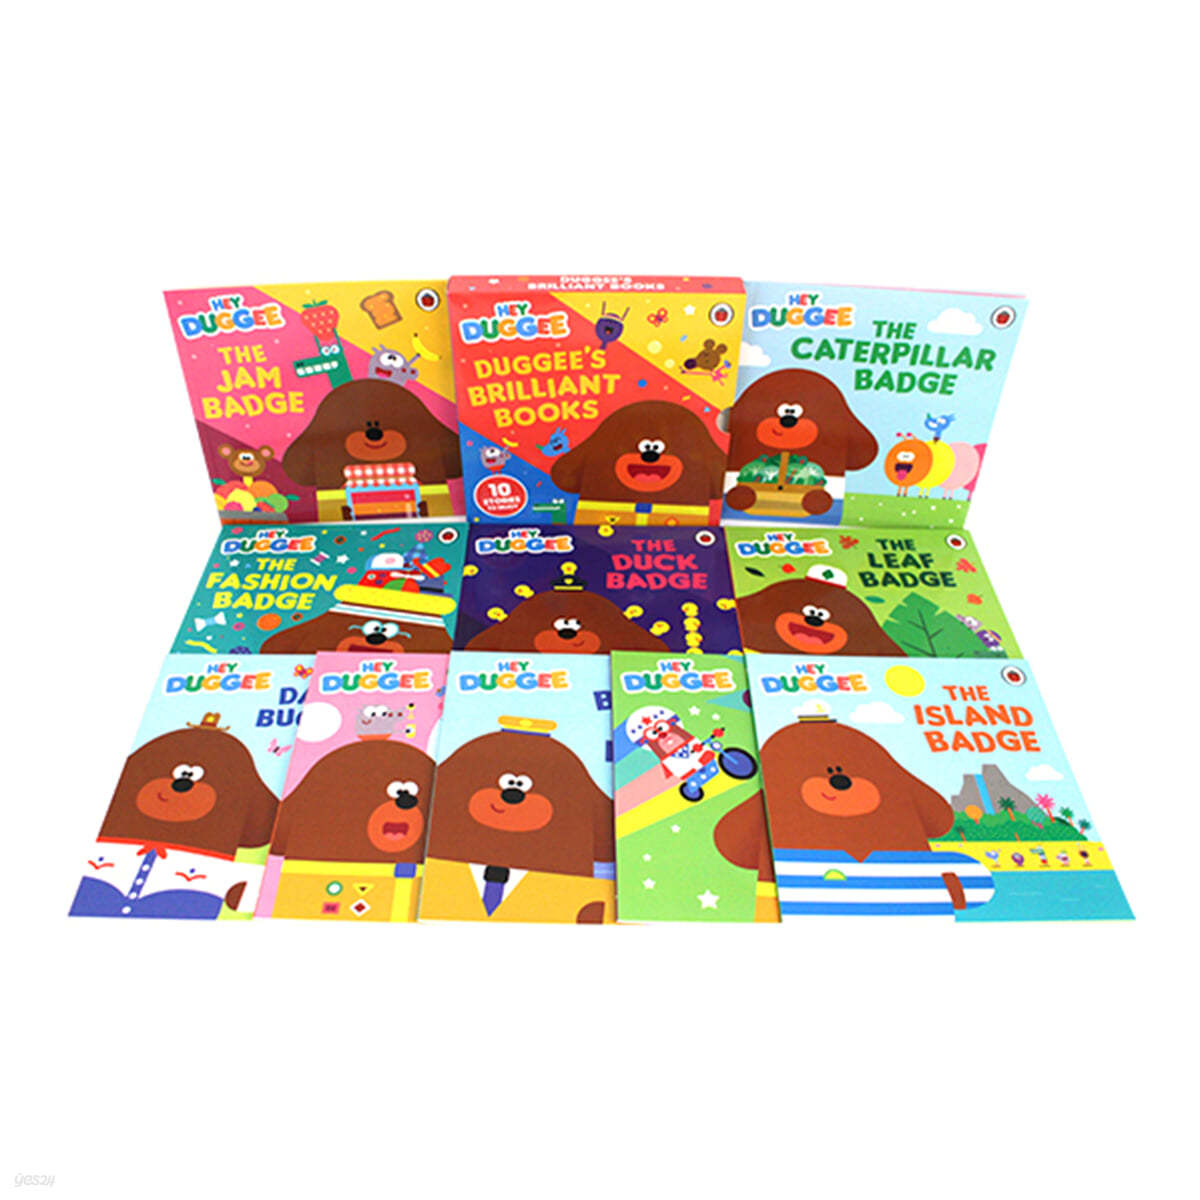 Duggee's Brilliant 10 Books Stories Collection